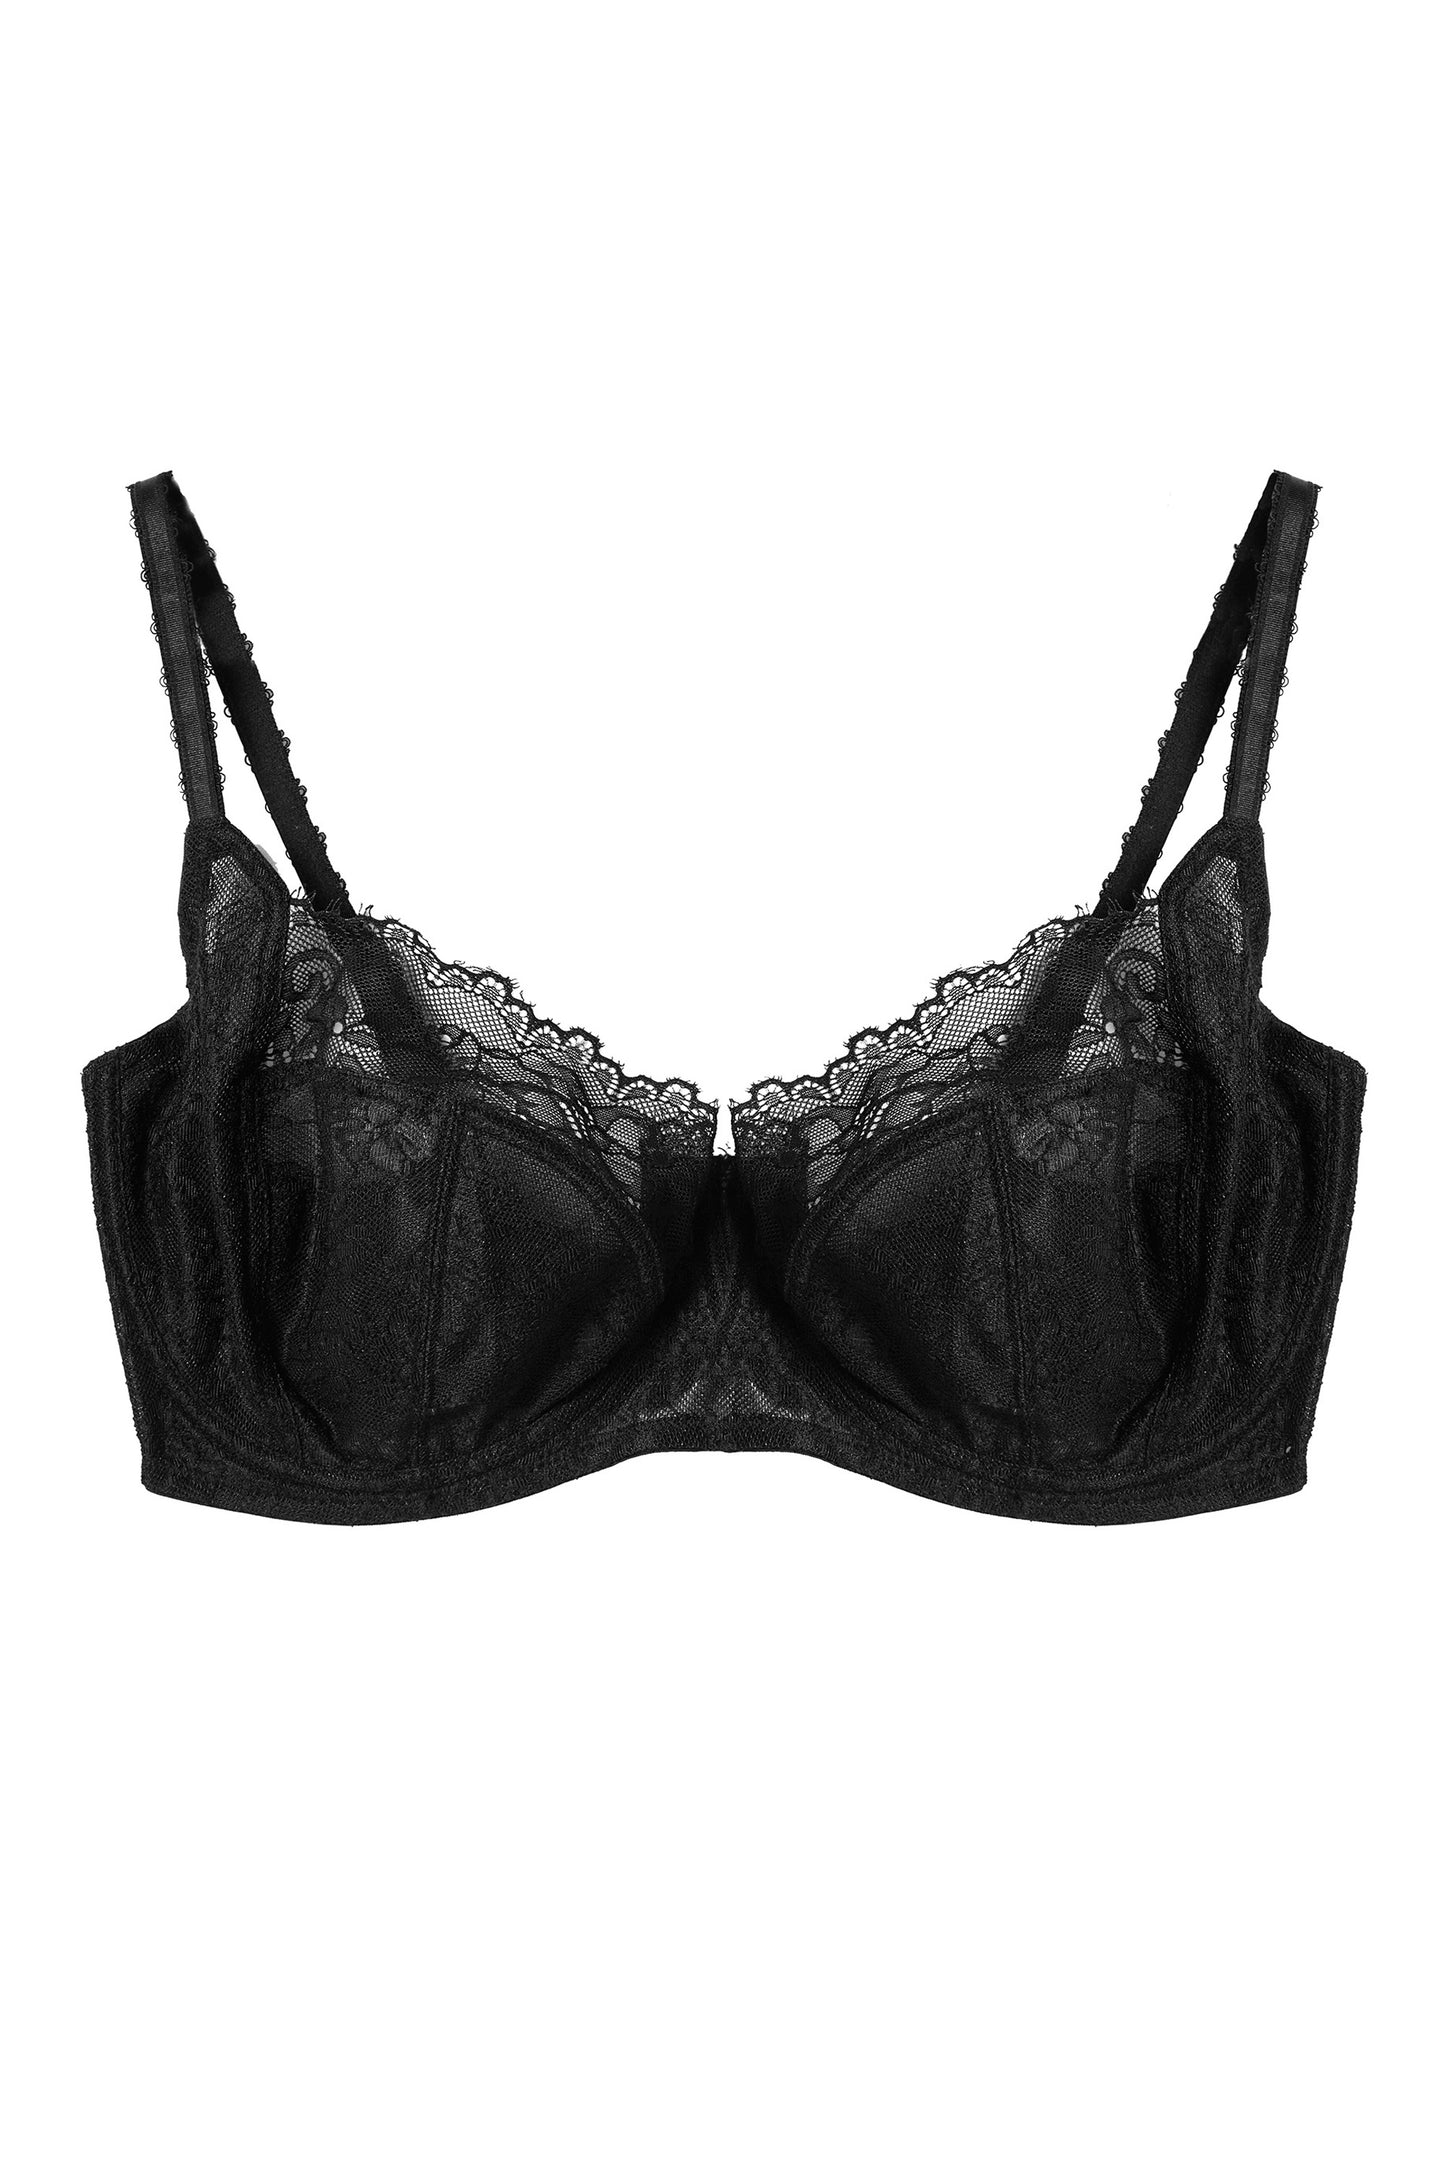 Rosalyn Black Lace Bra - 32-40 bands and D-H cups (UK size)